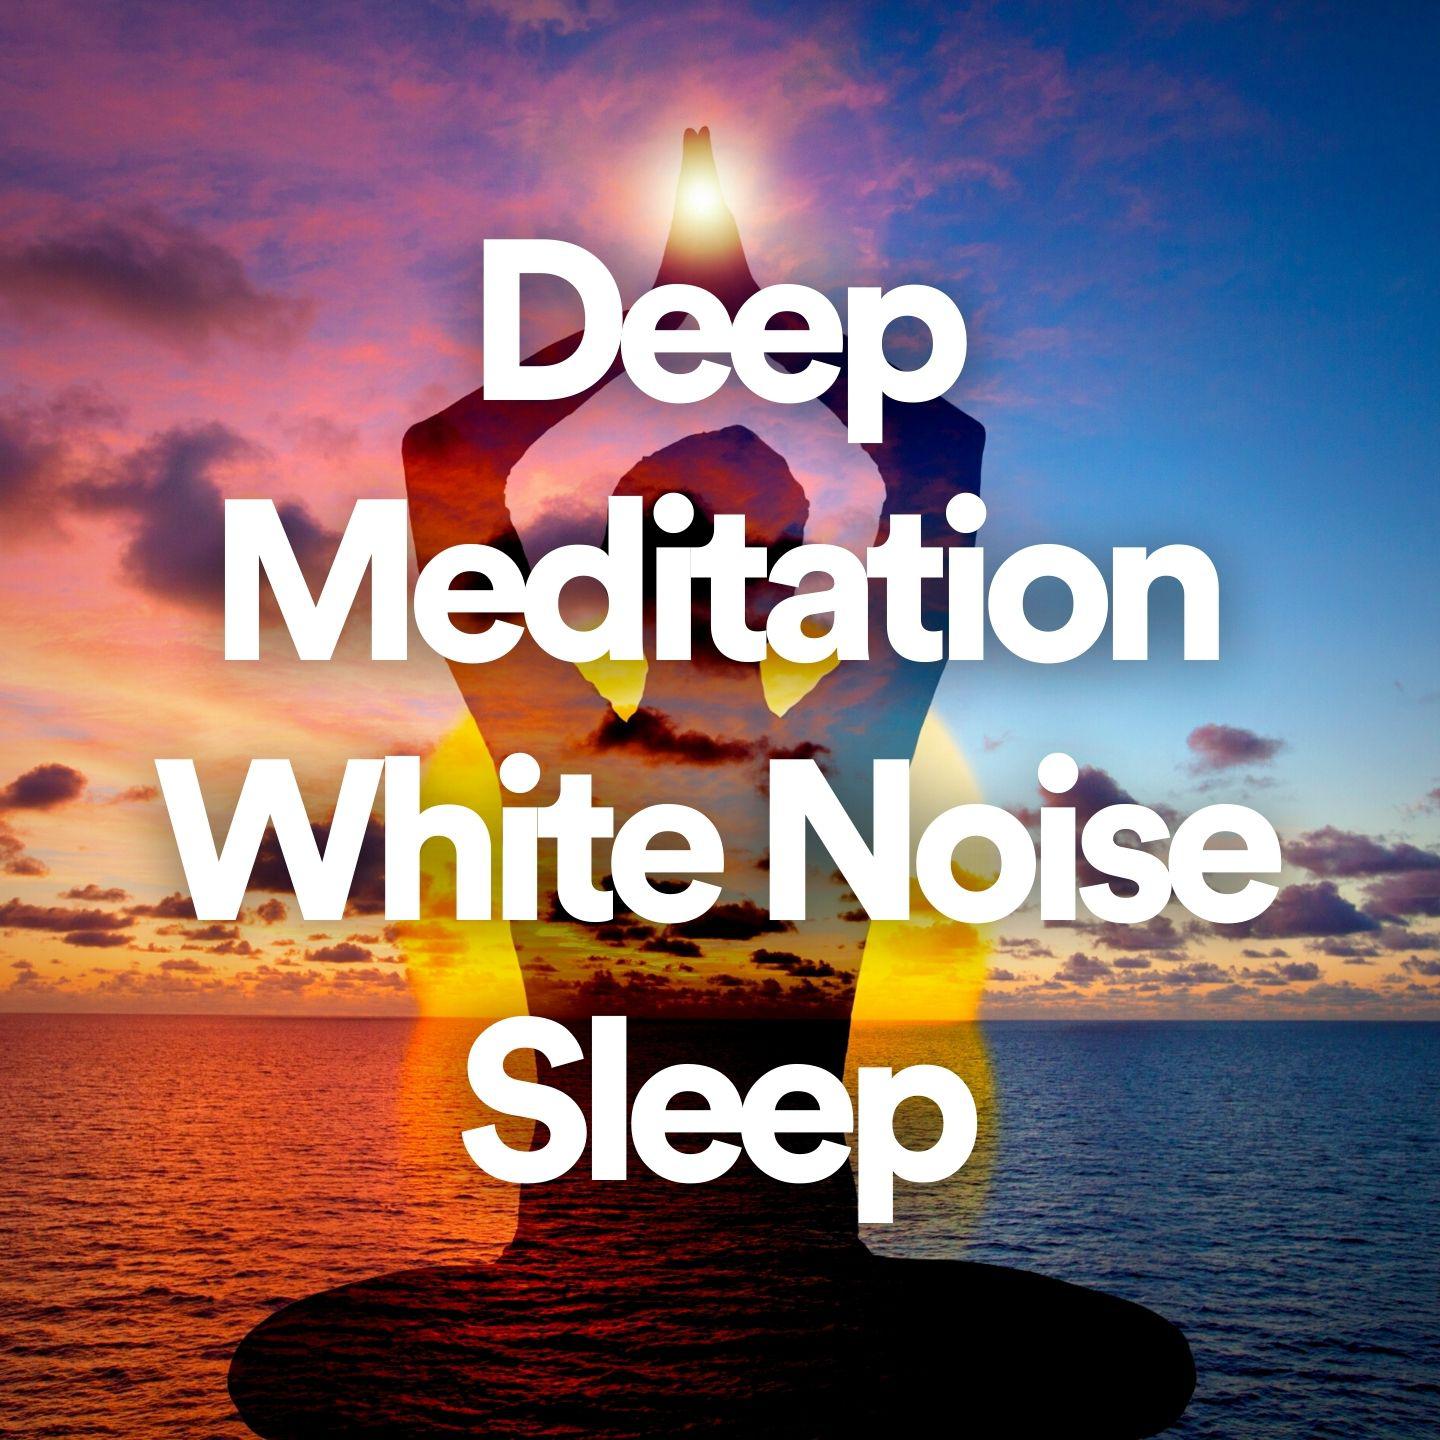 Zen Meditation and Natural White Noise and New Age Deep Massage - Karma Ways